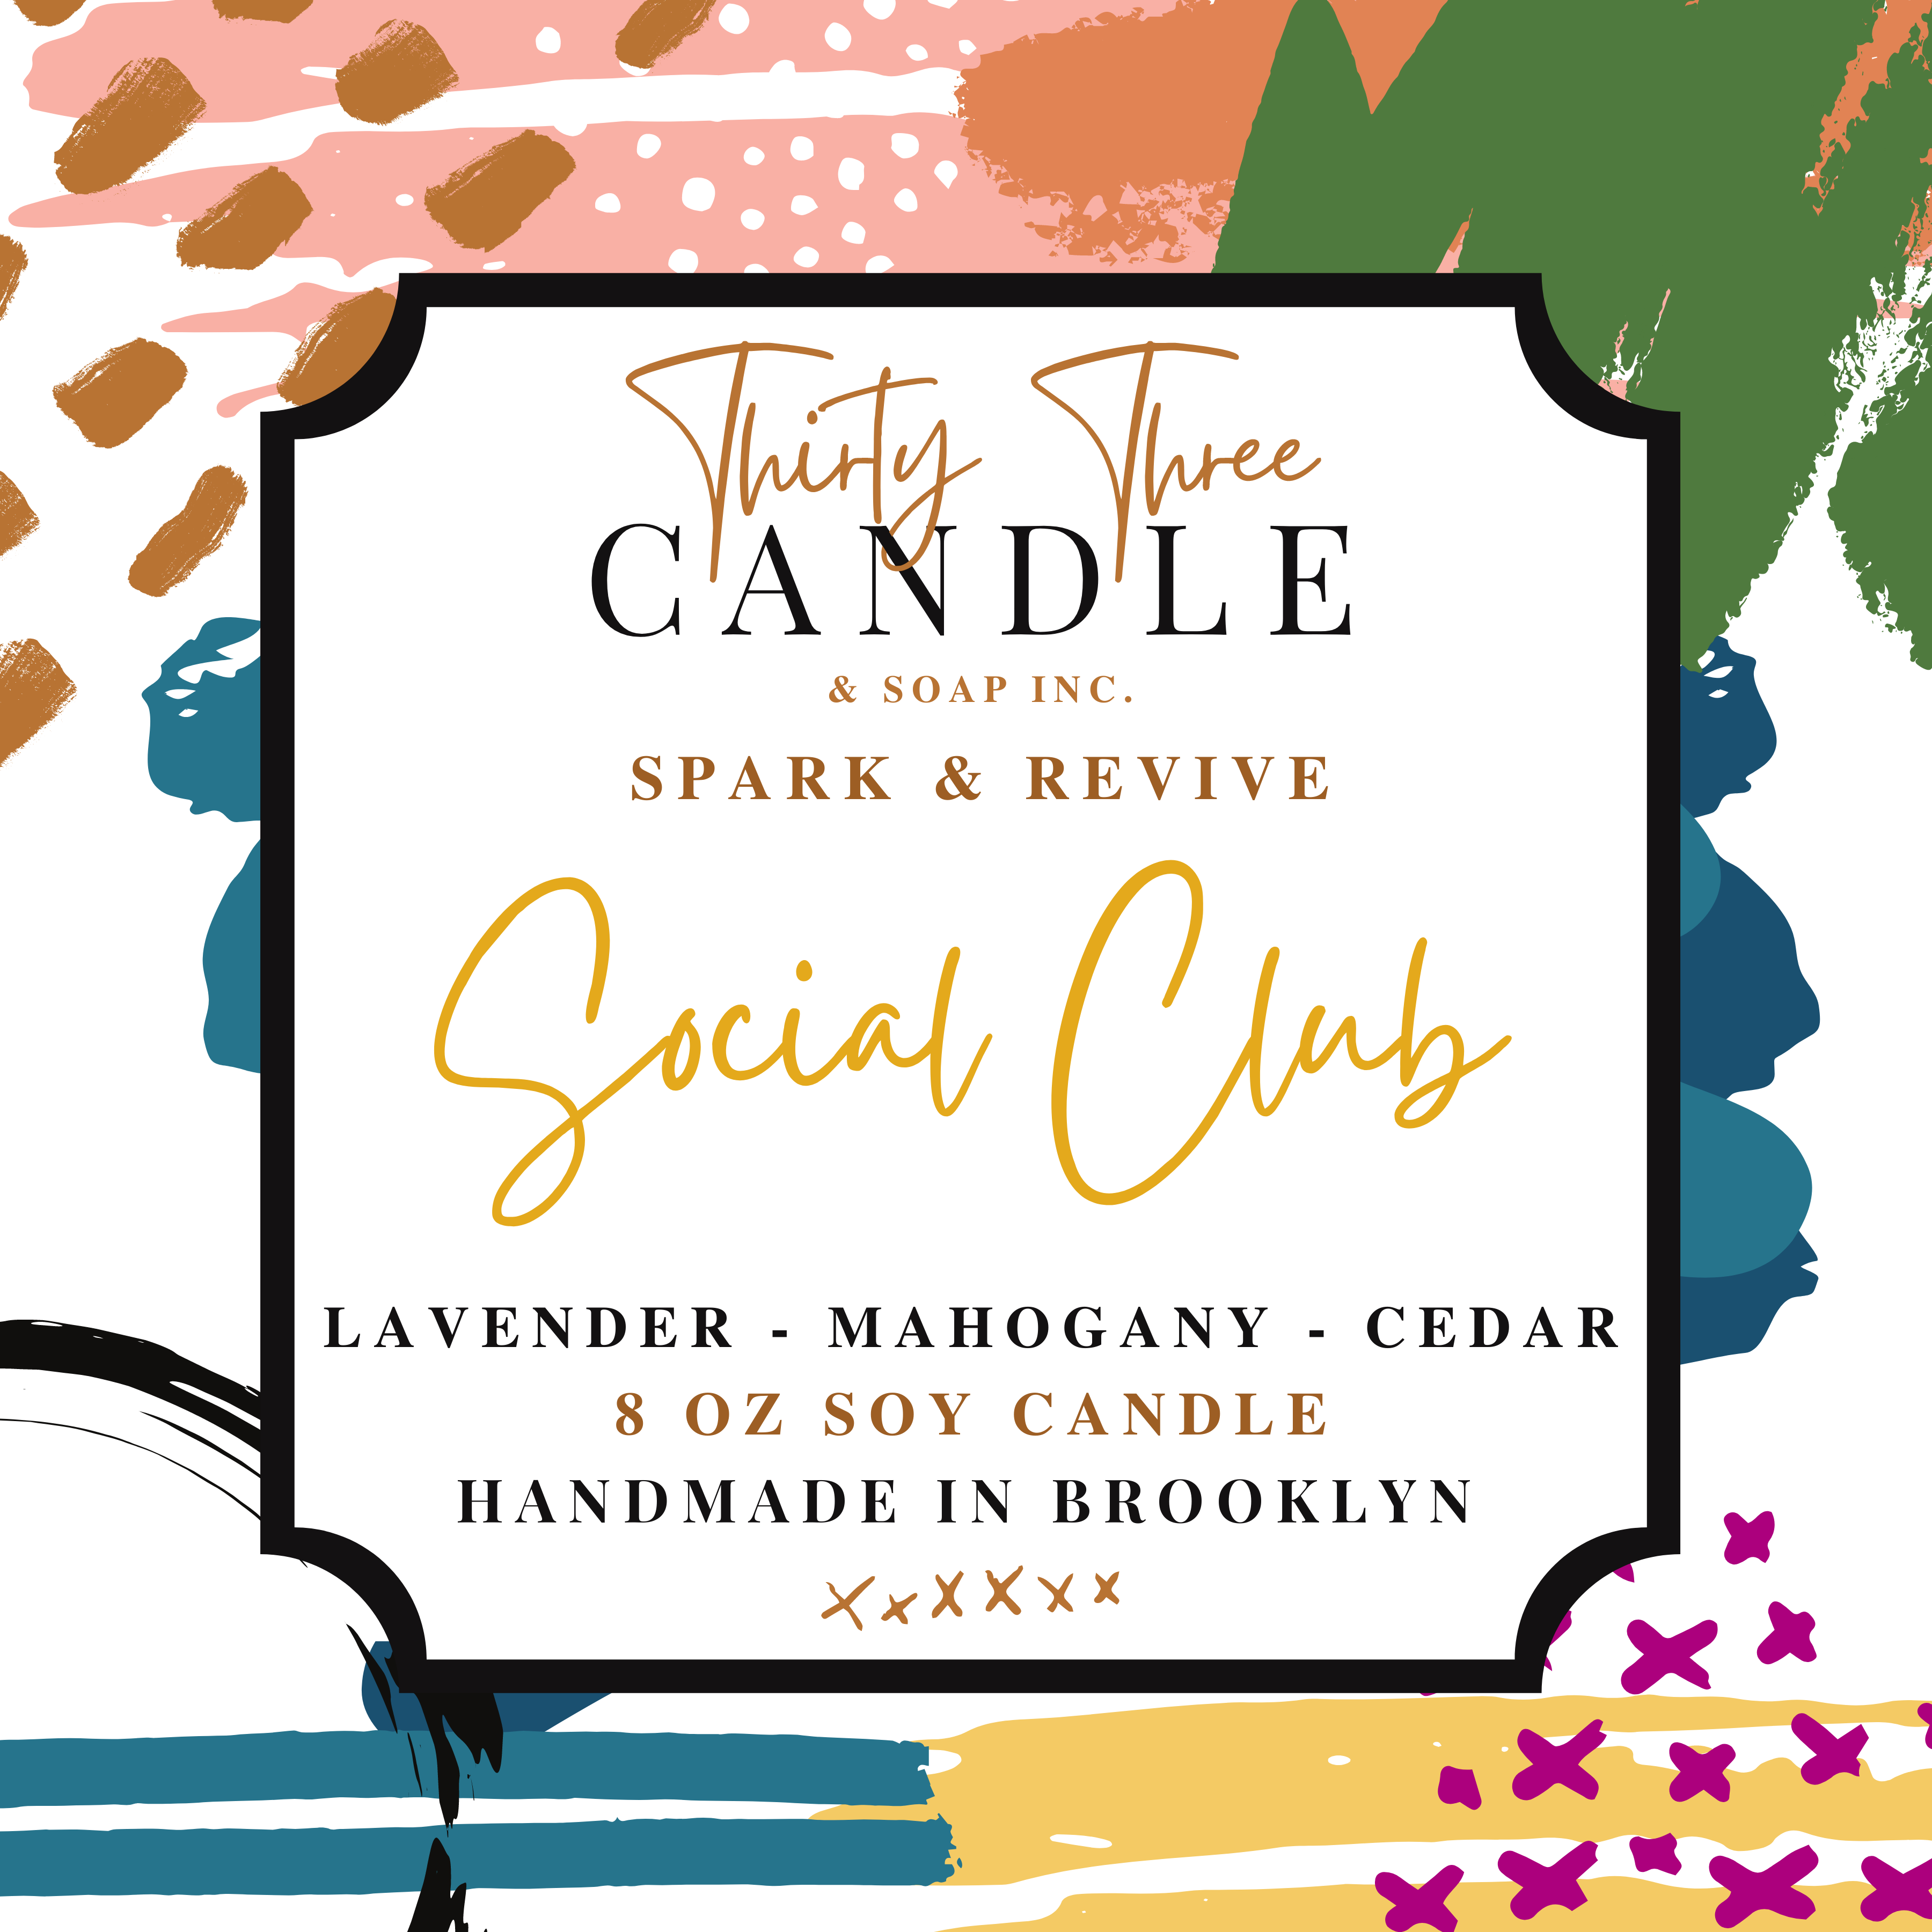 Curl up on the couch or sit in your favorite chair as you take in our Social Club scented soy candle, a rich, warm scent with some spice and comfort.  Cedar wood and oak wood intertwine with warm mahogany to create the perfect masculine scent for any season. Topped with hints of clean lavender, jasmine, lily, and the rosy nuances of geranium, Social Club has plenty of depth and strength.   Social Club is inviting and perfect for year round satisfaction.@SparkandRevive